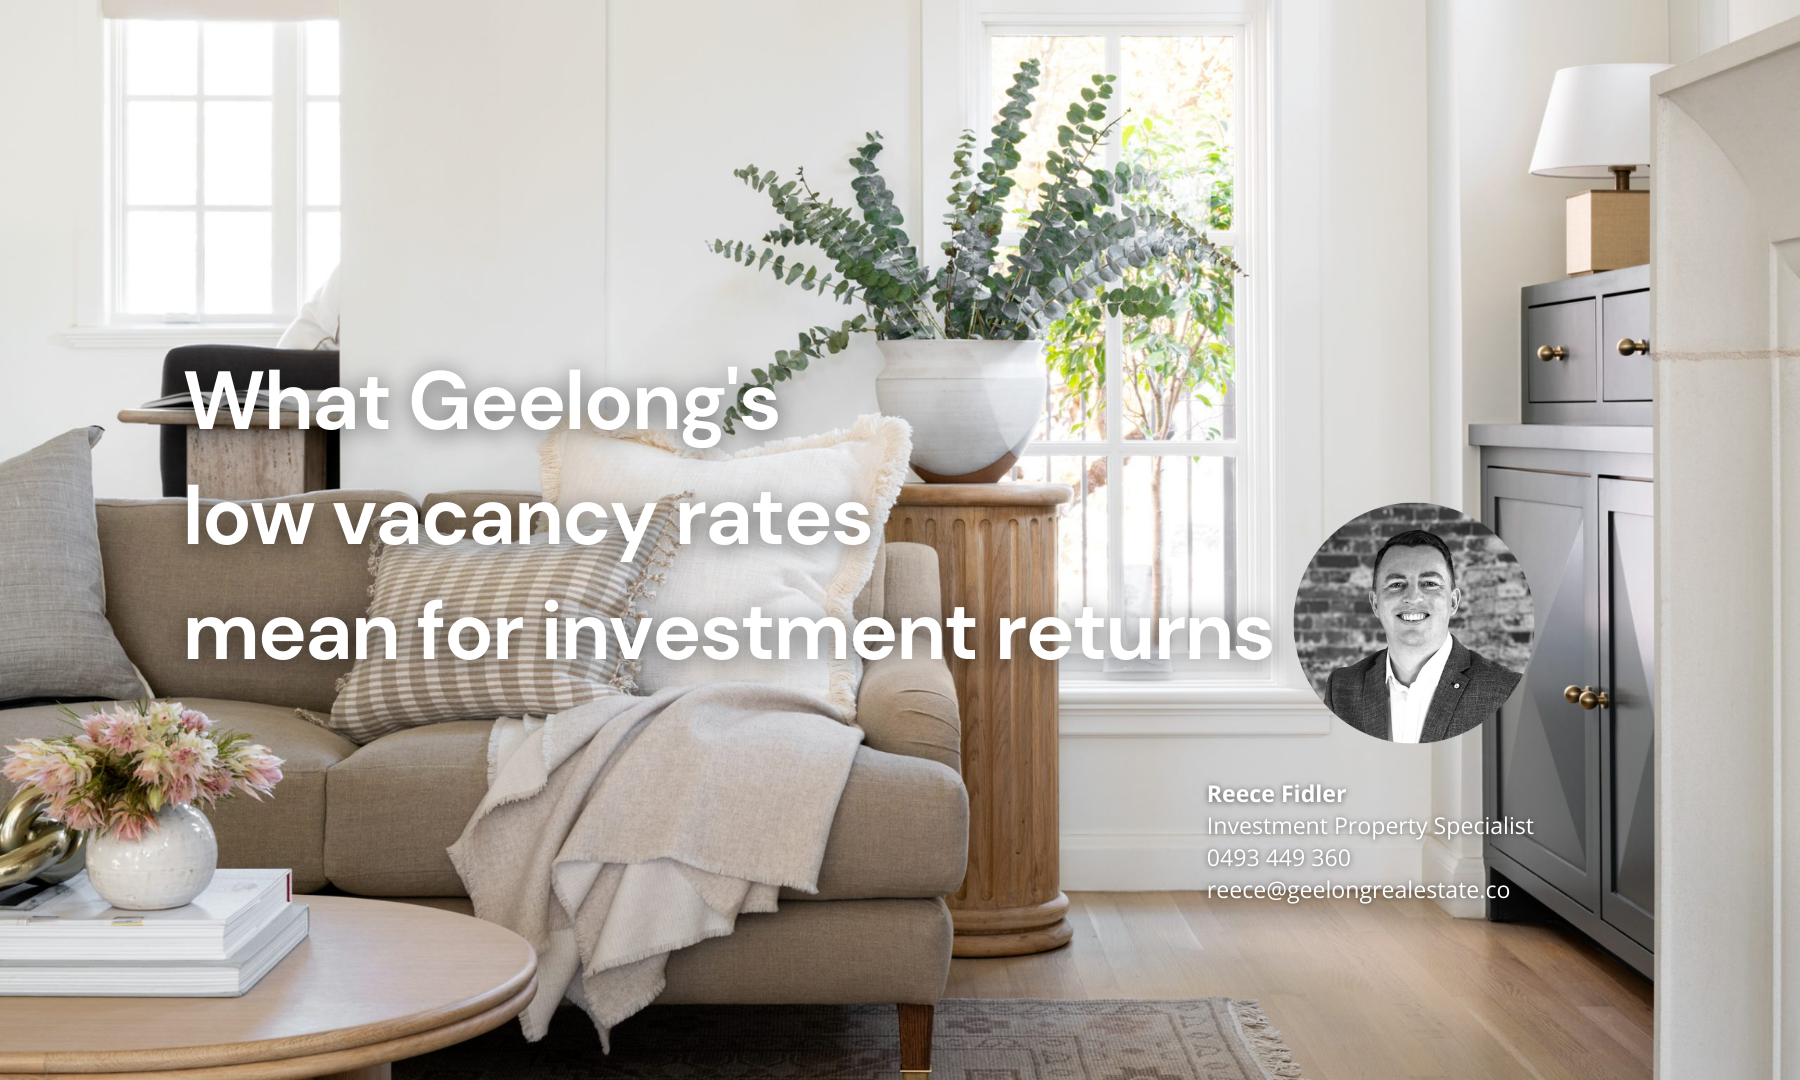 Geelong Property manager Reece Fidler shares insights on the Geelong Property Market